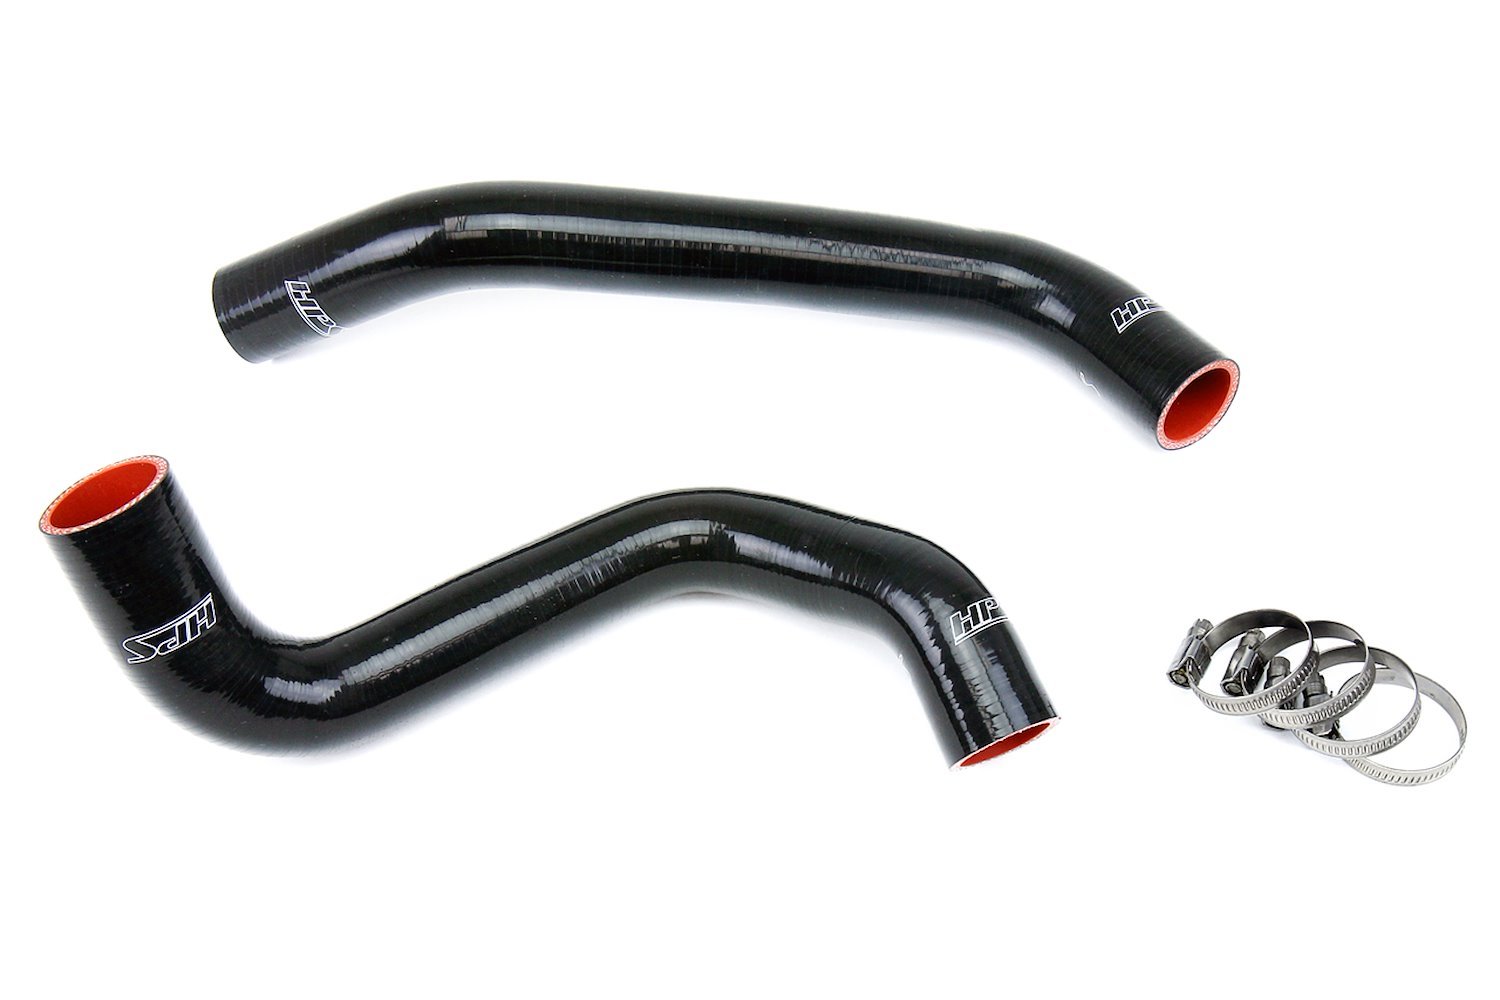 57-1305-BLK Radiator Hose Kit, High-Temp 3-Ply Reinforced Silicone, Replace OEM Rubber Radiator Coolant Hoses